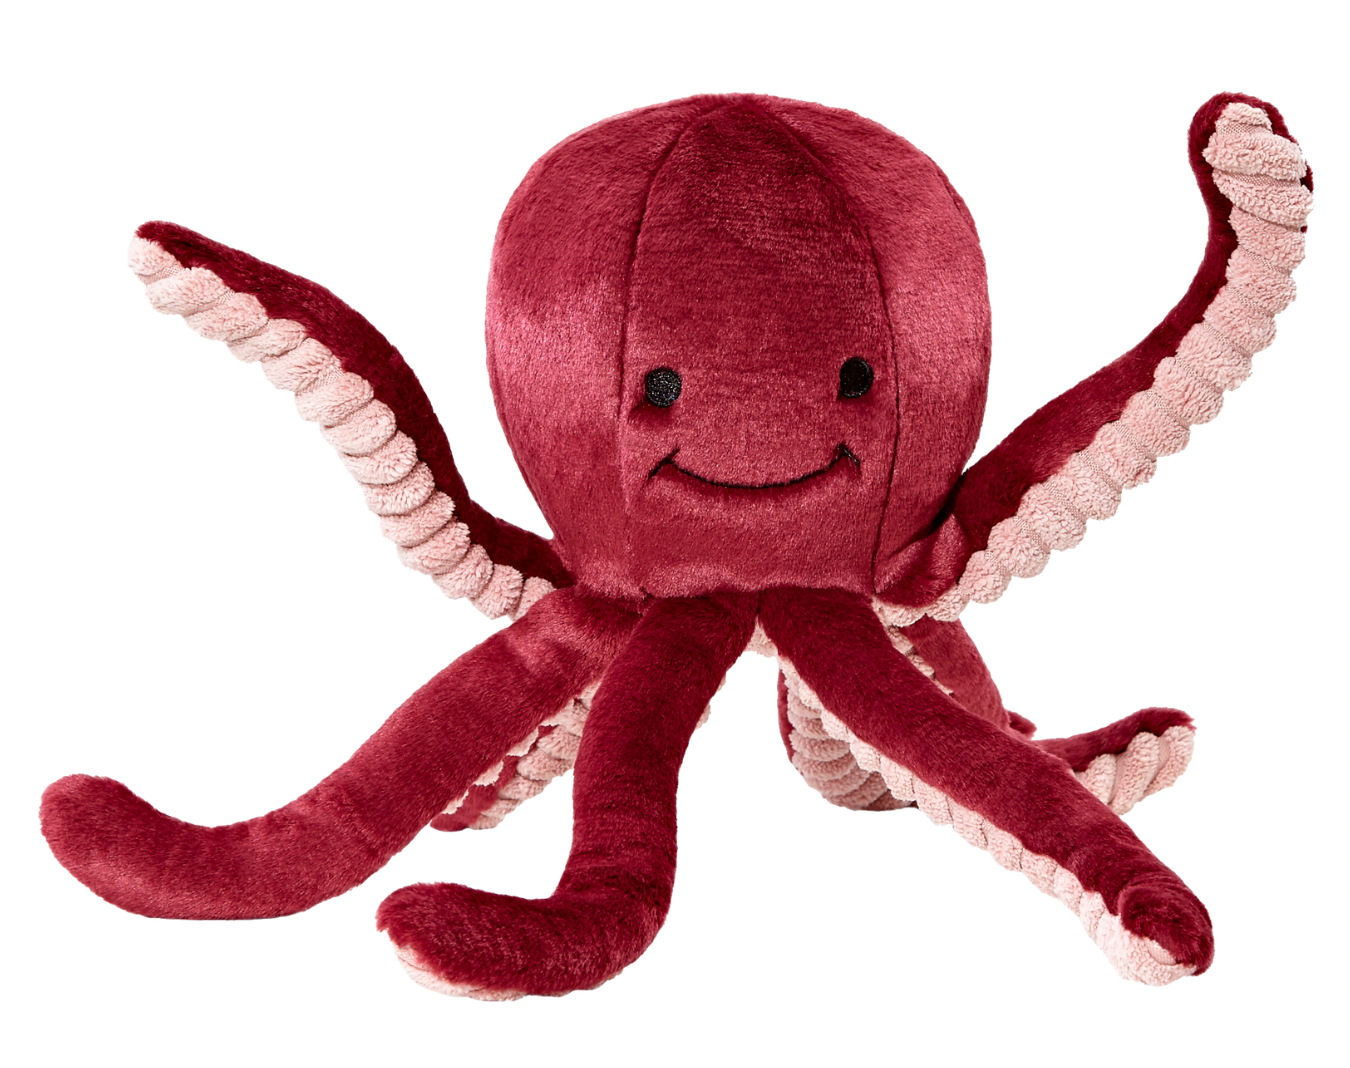 Fluff & Tuff "Olympia Octopus" Squeaky Plush Dog Toy